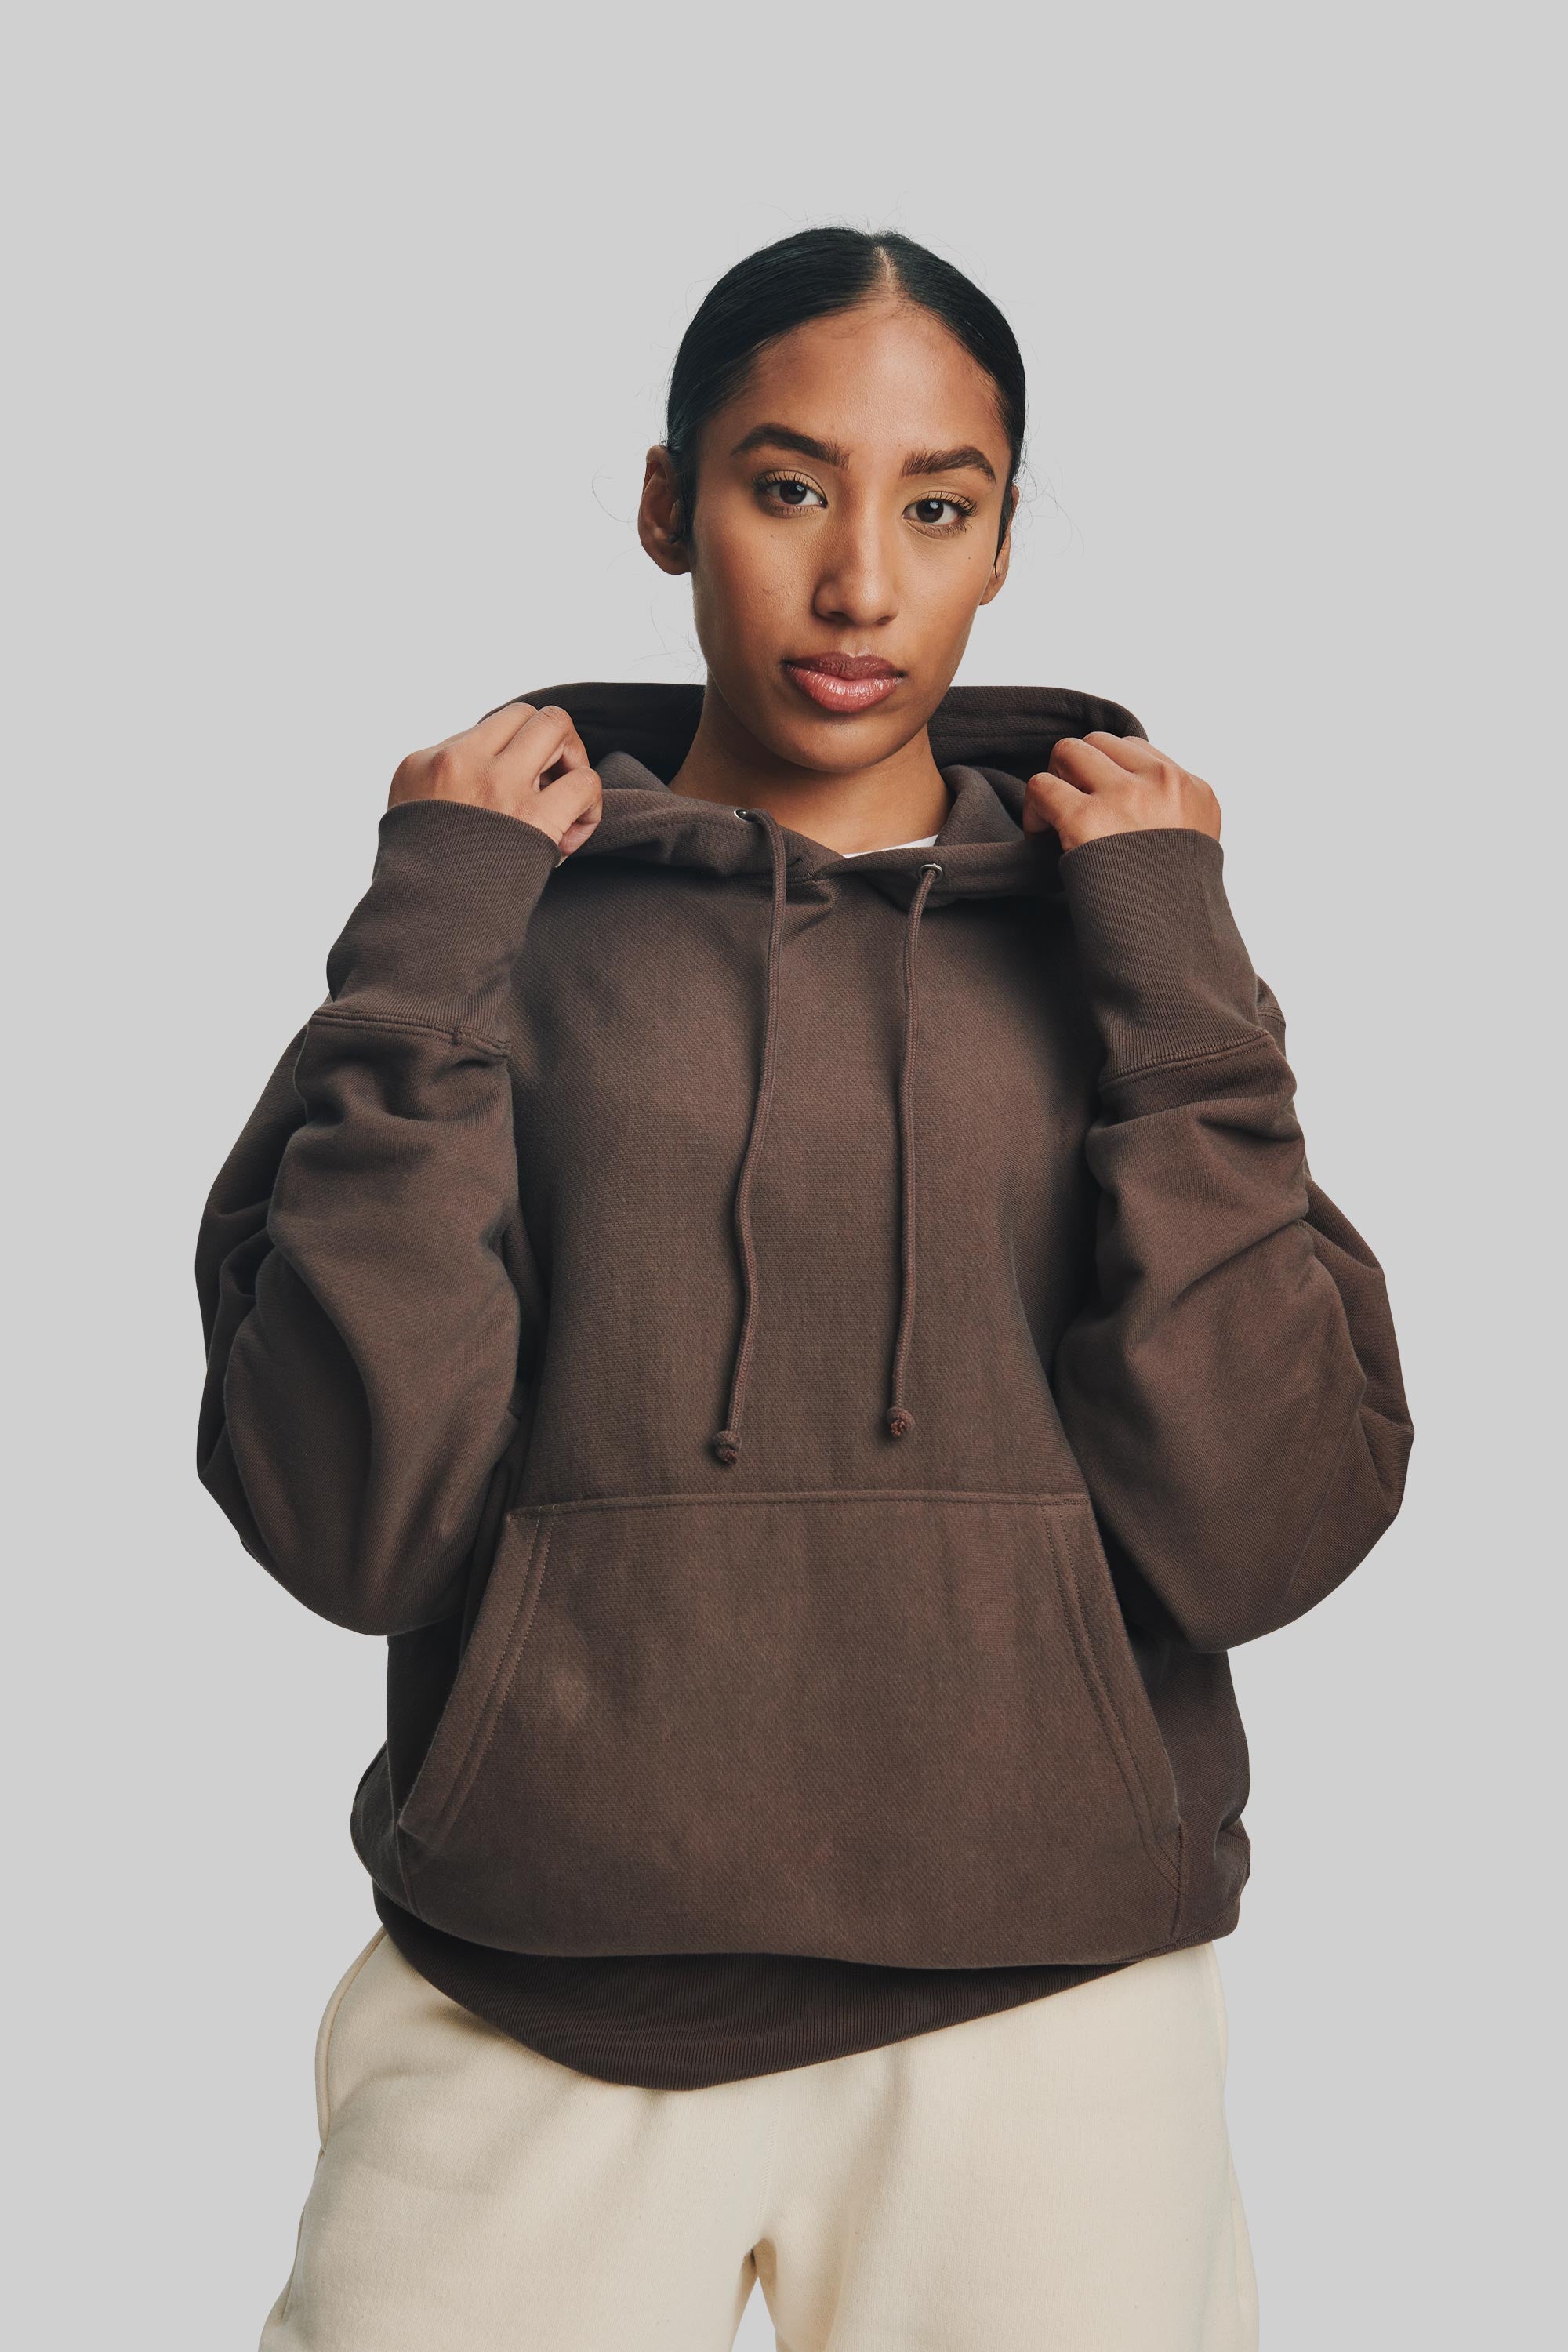 Blank Hoodie - Chocolate Brown 500 GSM Relaxed Fit – House Of Blanks